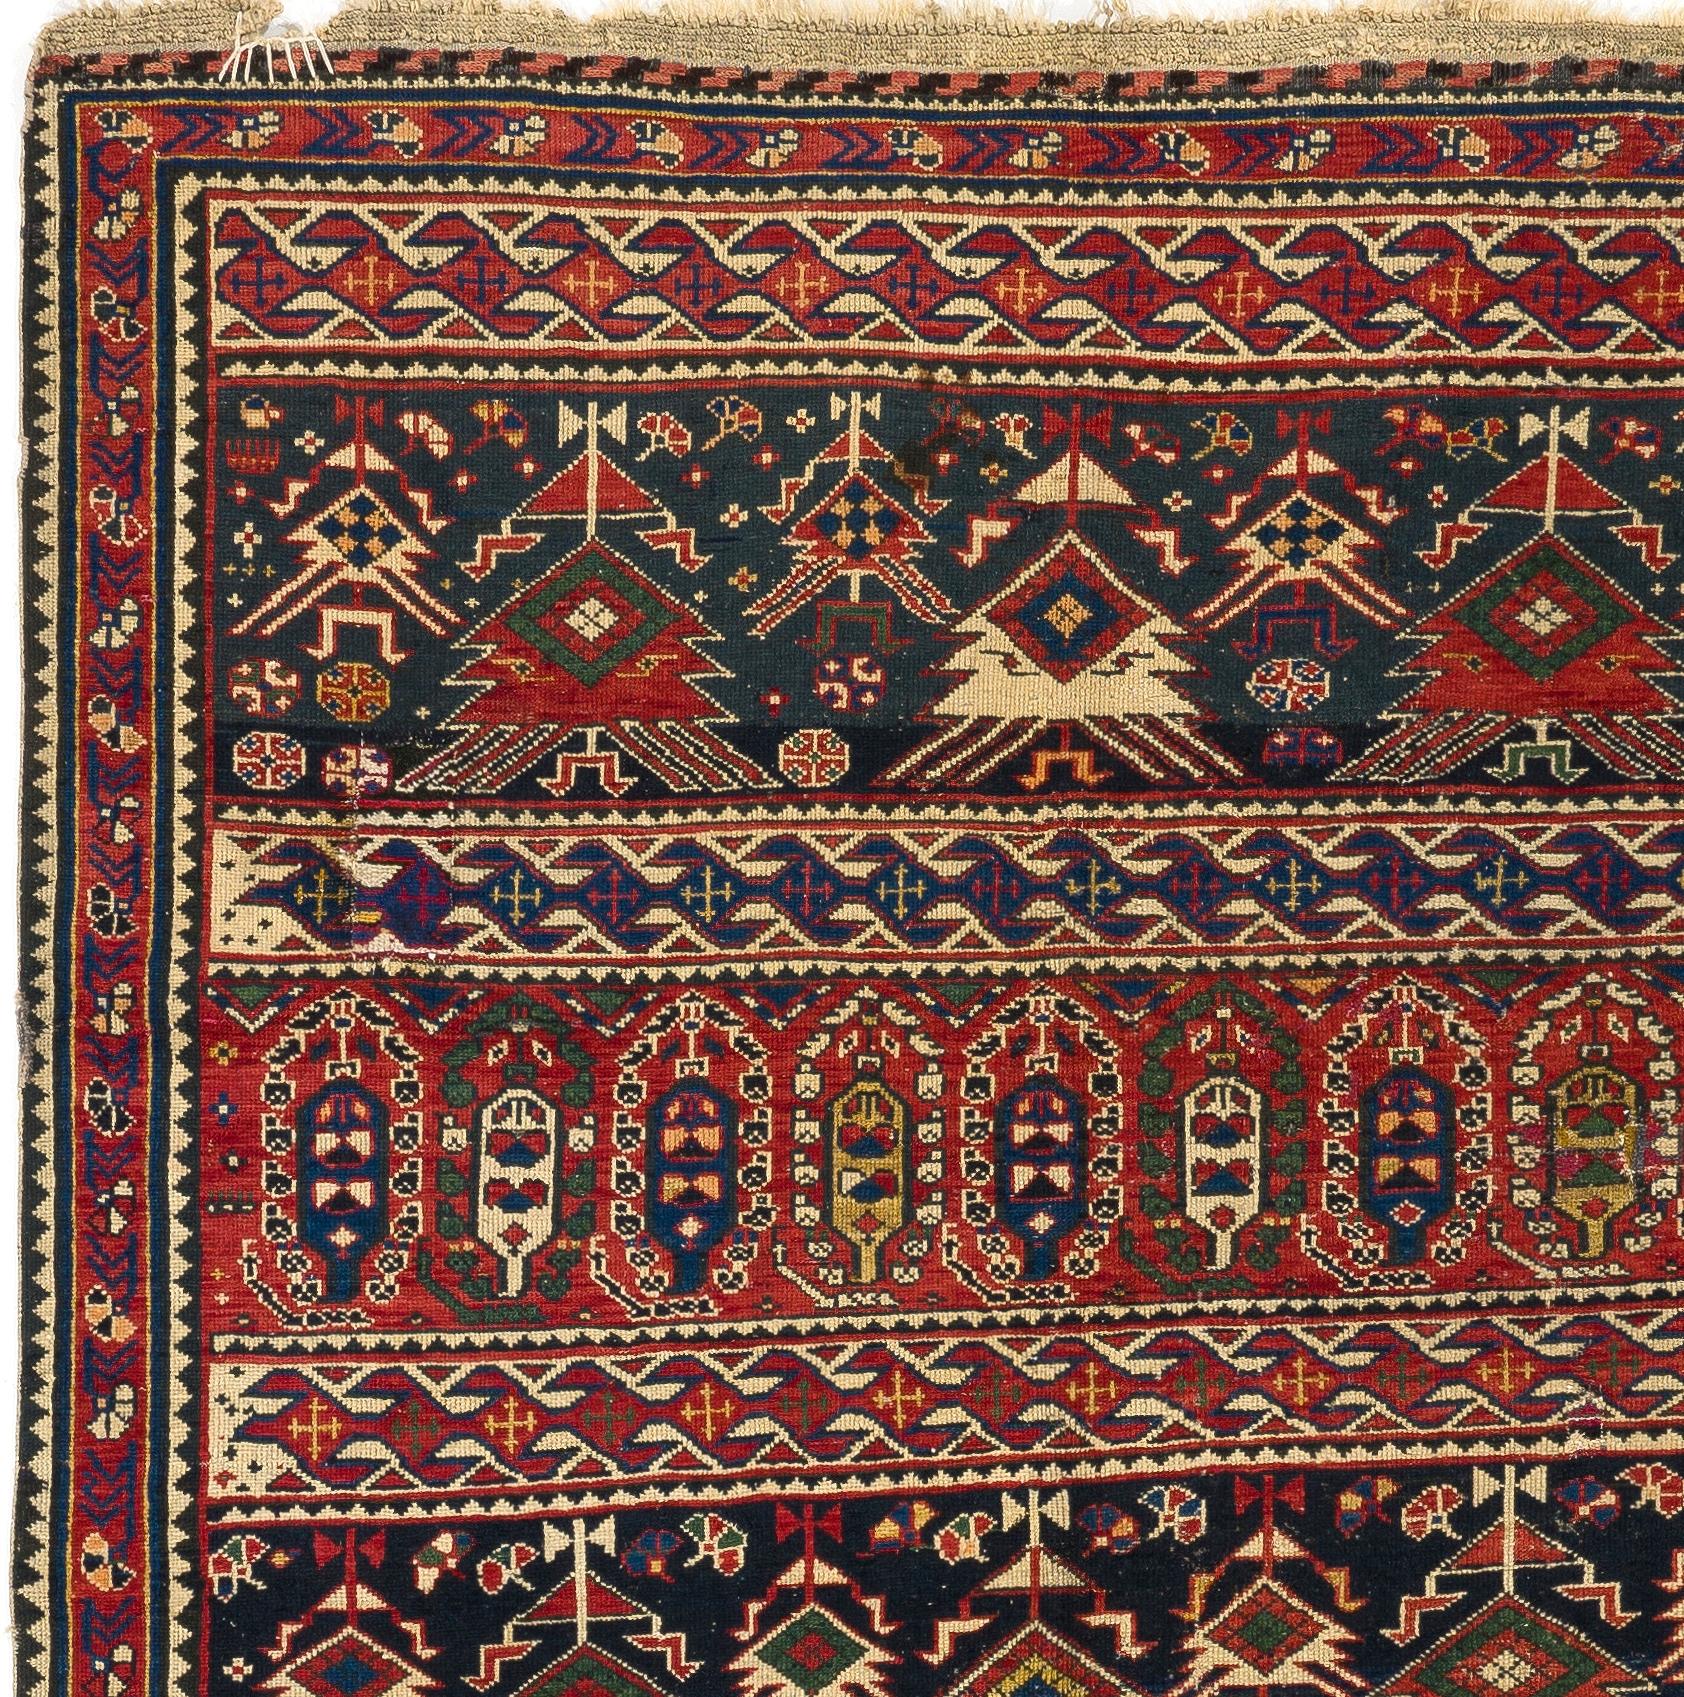 Antique Caucasian Karagashli Shirvan rug, circa 1915.
Finely hand-knotted with even medium wool pile on wool foundation. Origin good condition. Sturdy and as clean as a brand new rug (deep washed professionally). 
Size: 4' x 6'7''